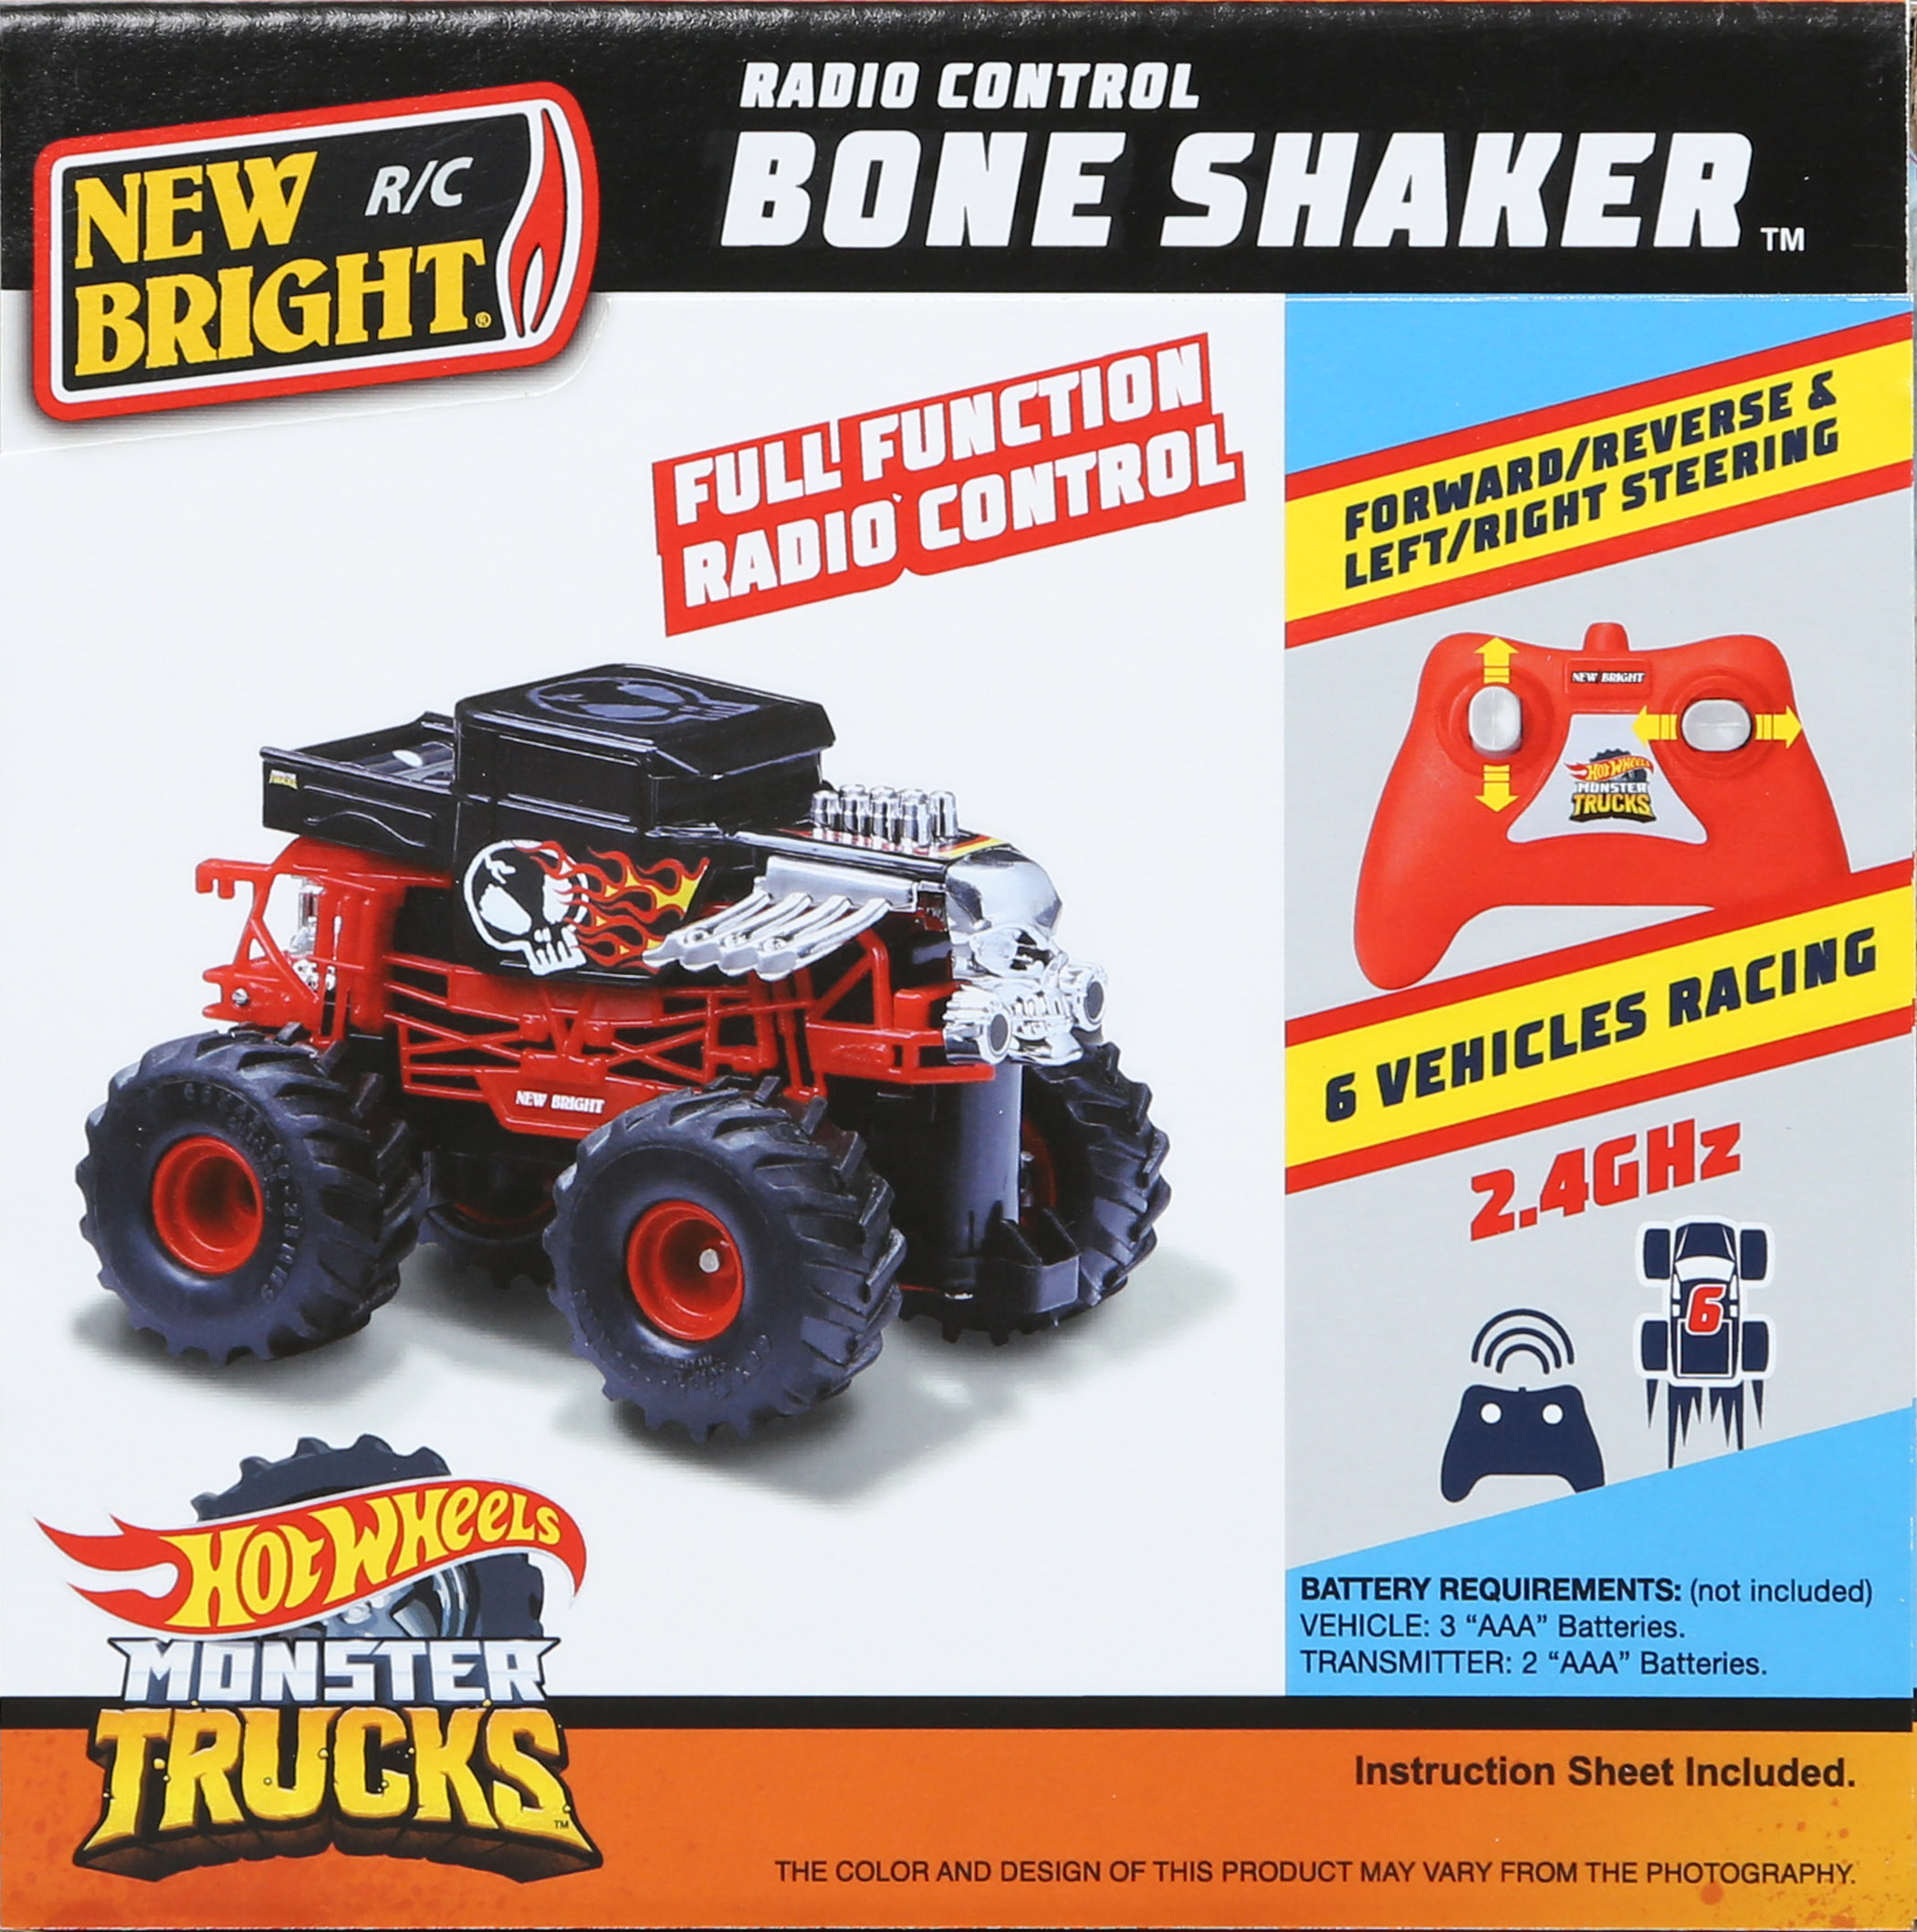 New Bright 1:43 Scale Remote Controlled Bone Shaker Monster Truck Play Vehicle - image 3 of 10